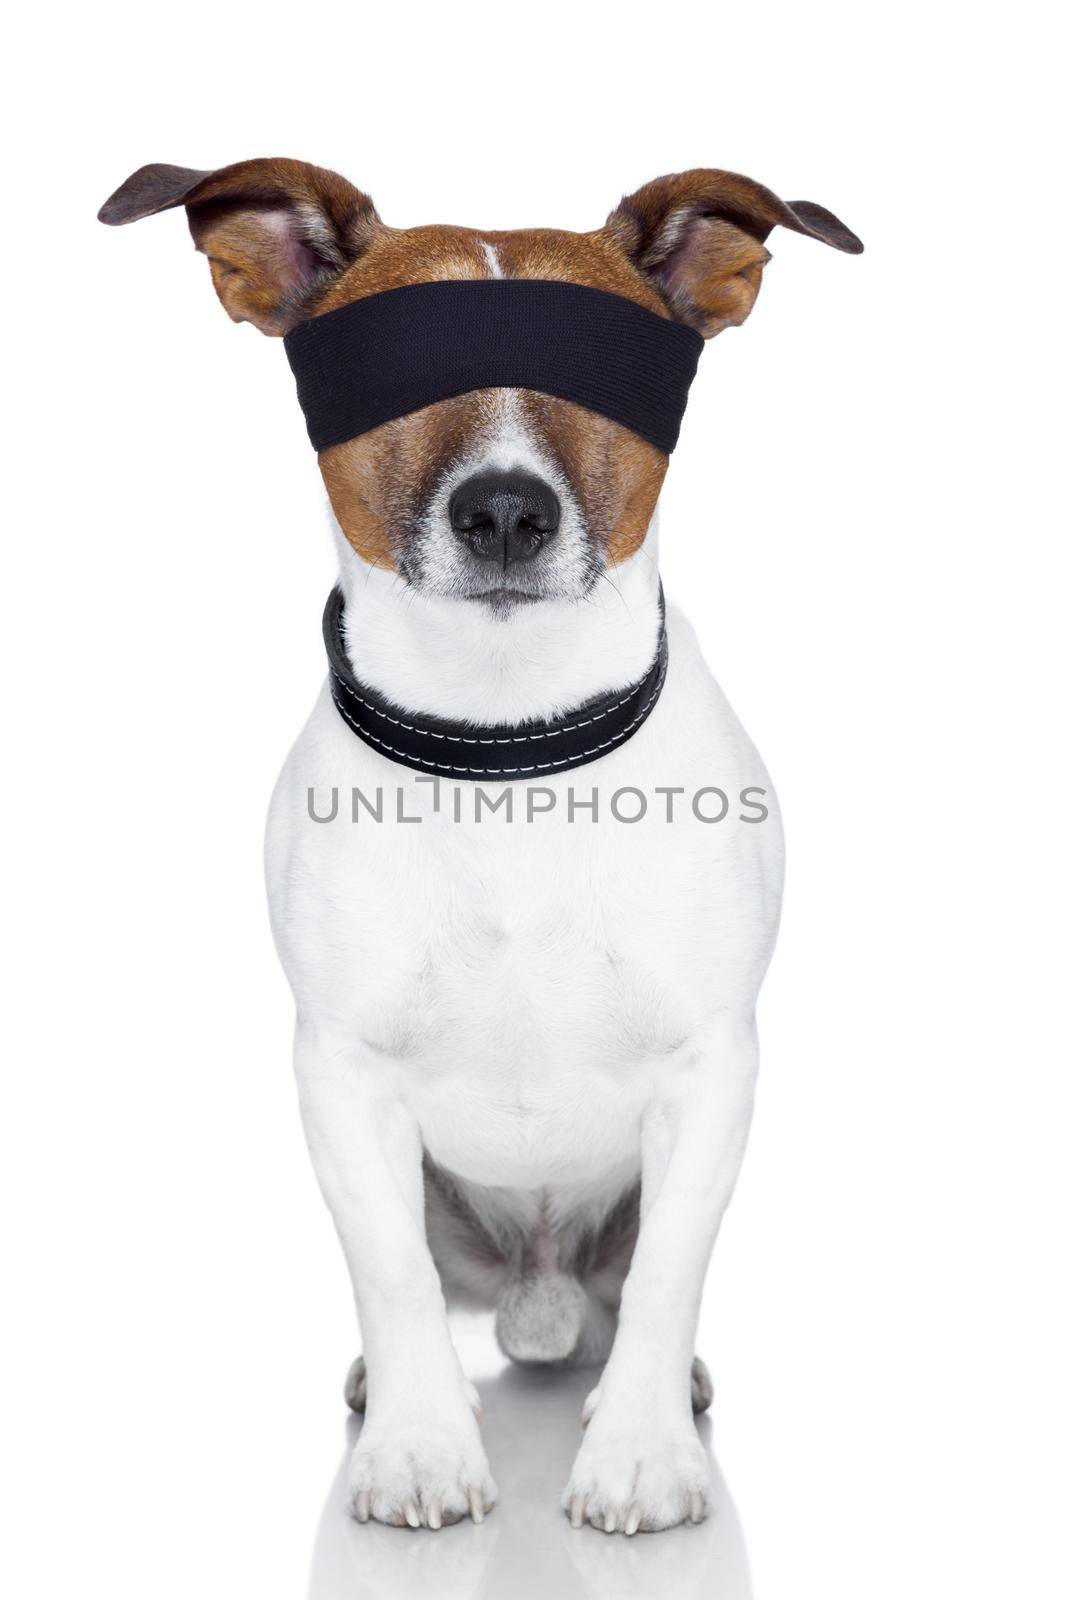 blindfold dog cover eyes by Brosch